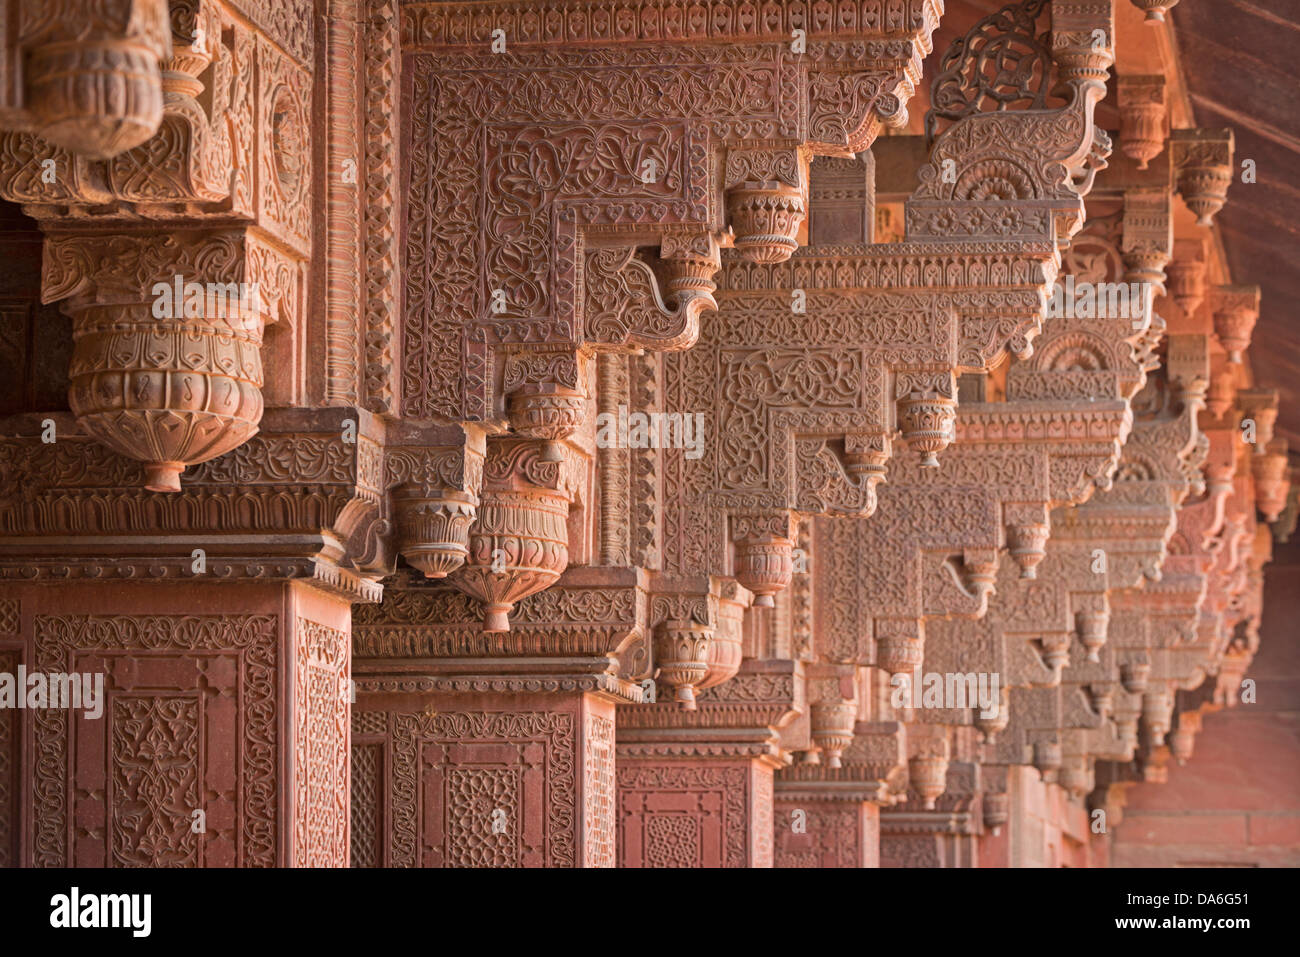 Decorative elements carved on sandstone pillars, Red Fort Stock Photo